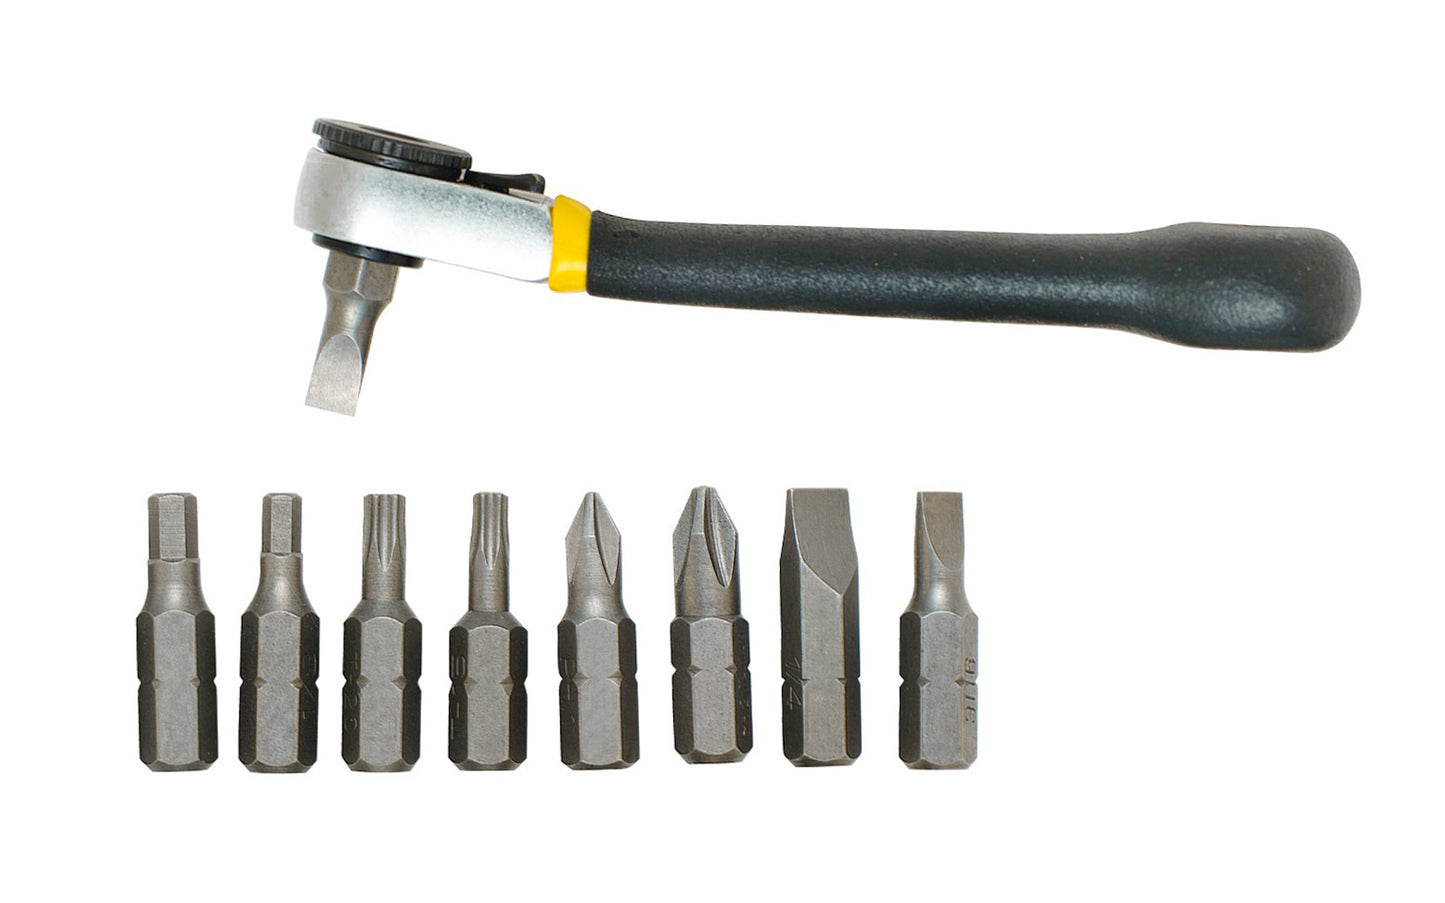 9-Piece Ratcheting Offset Screwdriver Set - Model No. 80075 ~ Ratcheting Offset Screwdriver Set is ideal for use where screws are concealed or obstructed, leverage is required, or turning space is limited ~ Square Drive bits ~ Square Drive sockets ~ Torx Drive Bits ~ Extension handle ~ Square Drive adapter ~ Screwdriver blades ~ Hardened, tempered alloy steel ~ General Tools 038728800756